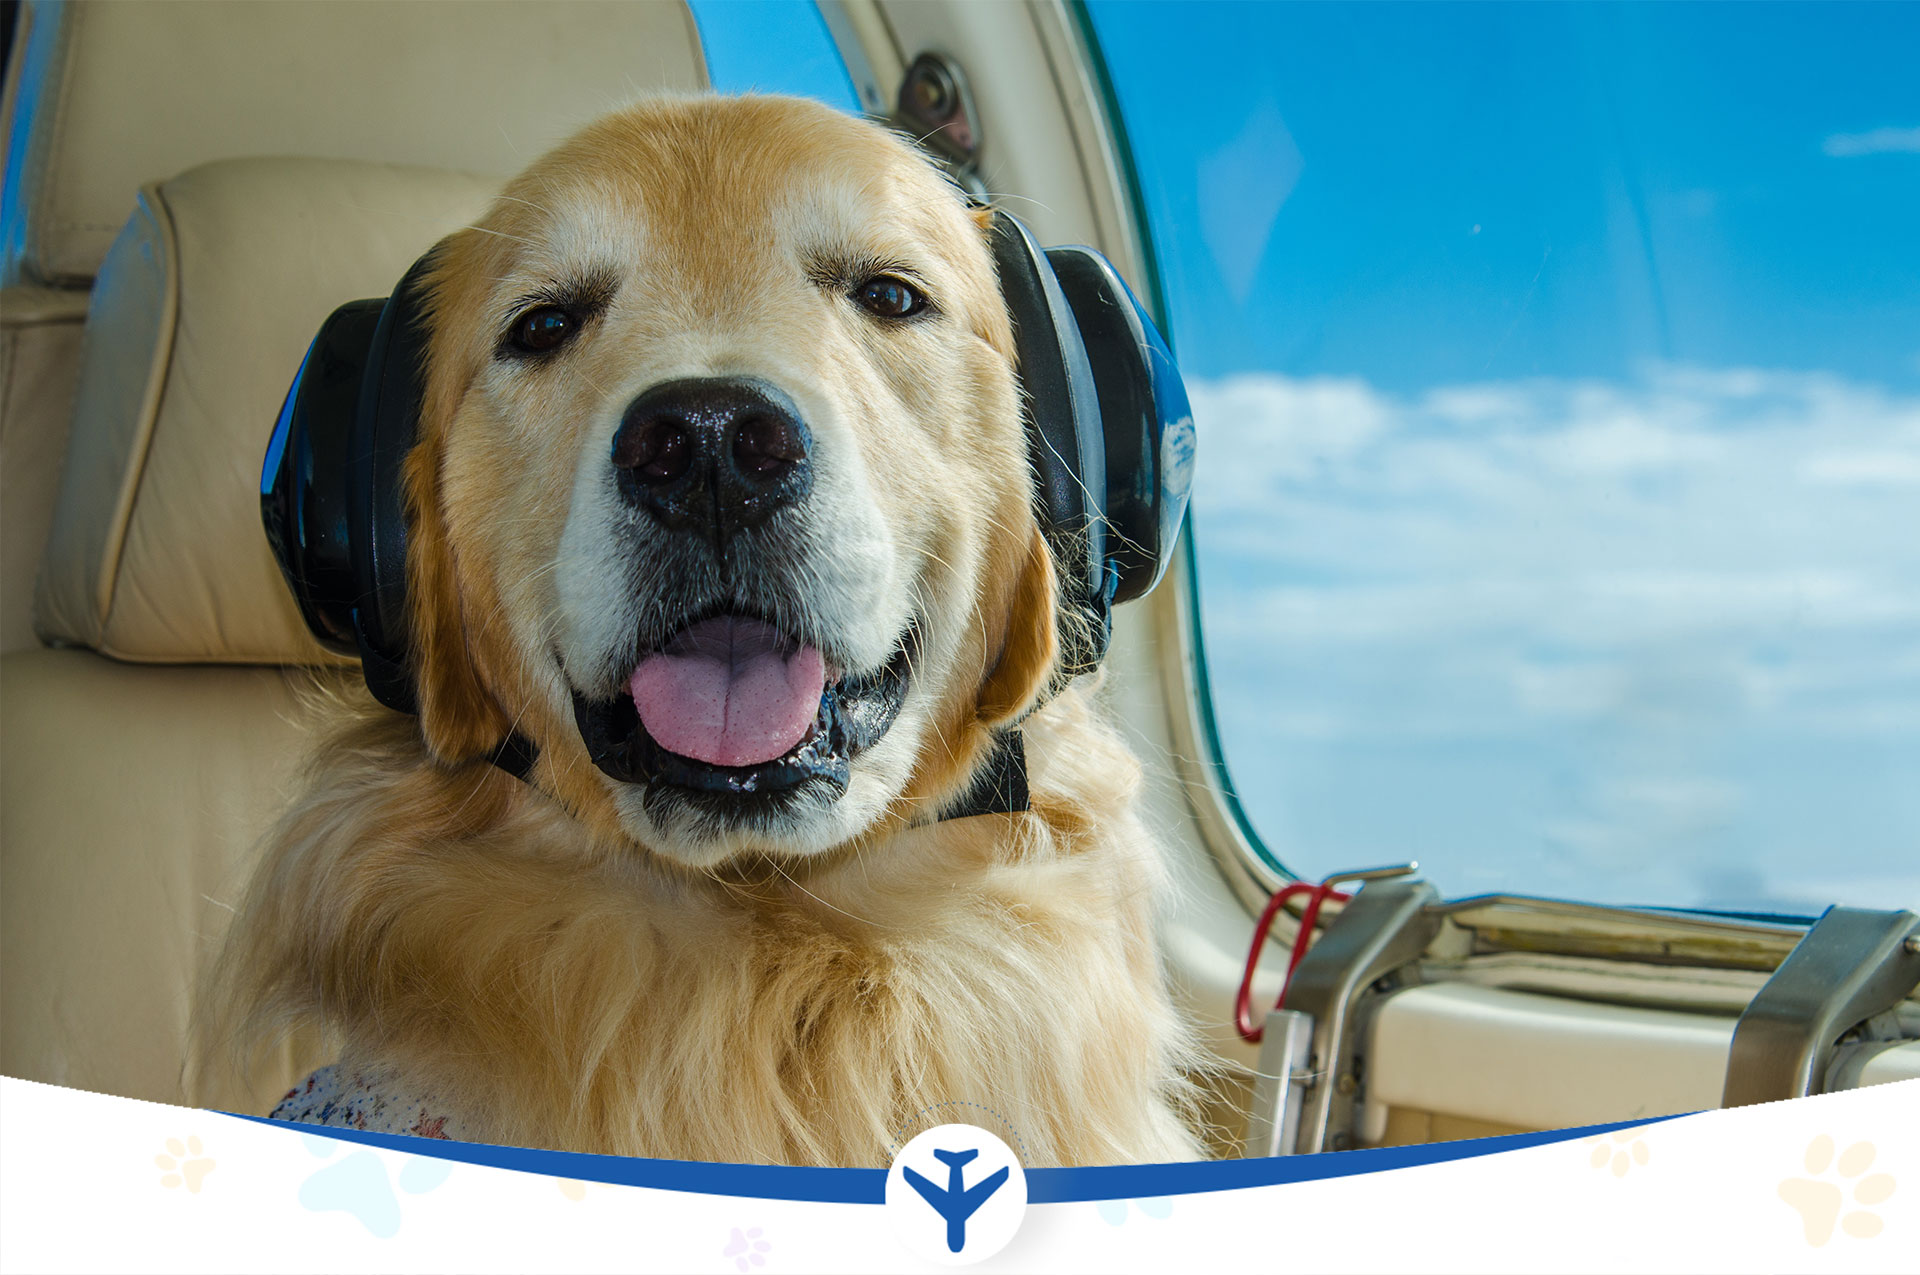 Private Jet Pet Travel - Ferndale Kennels & Cattery